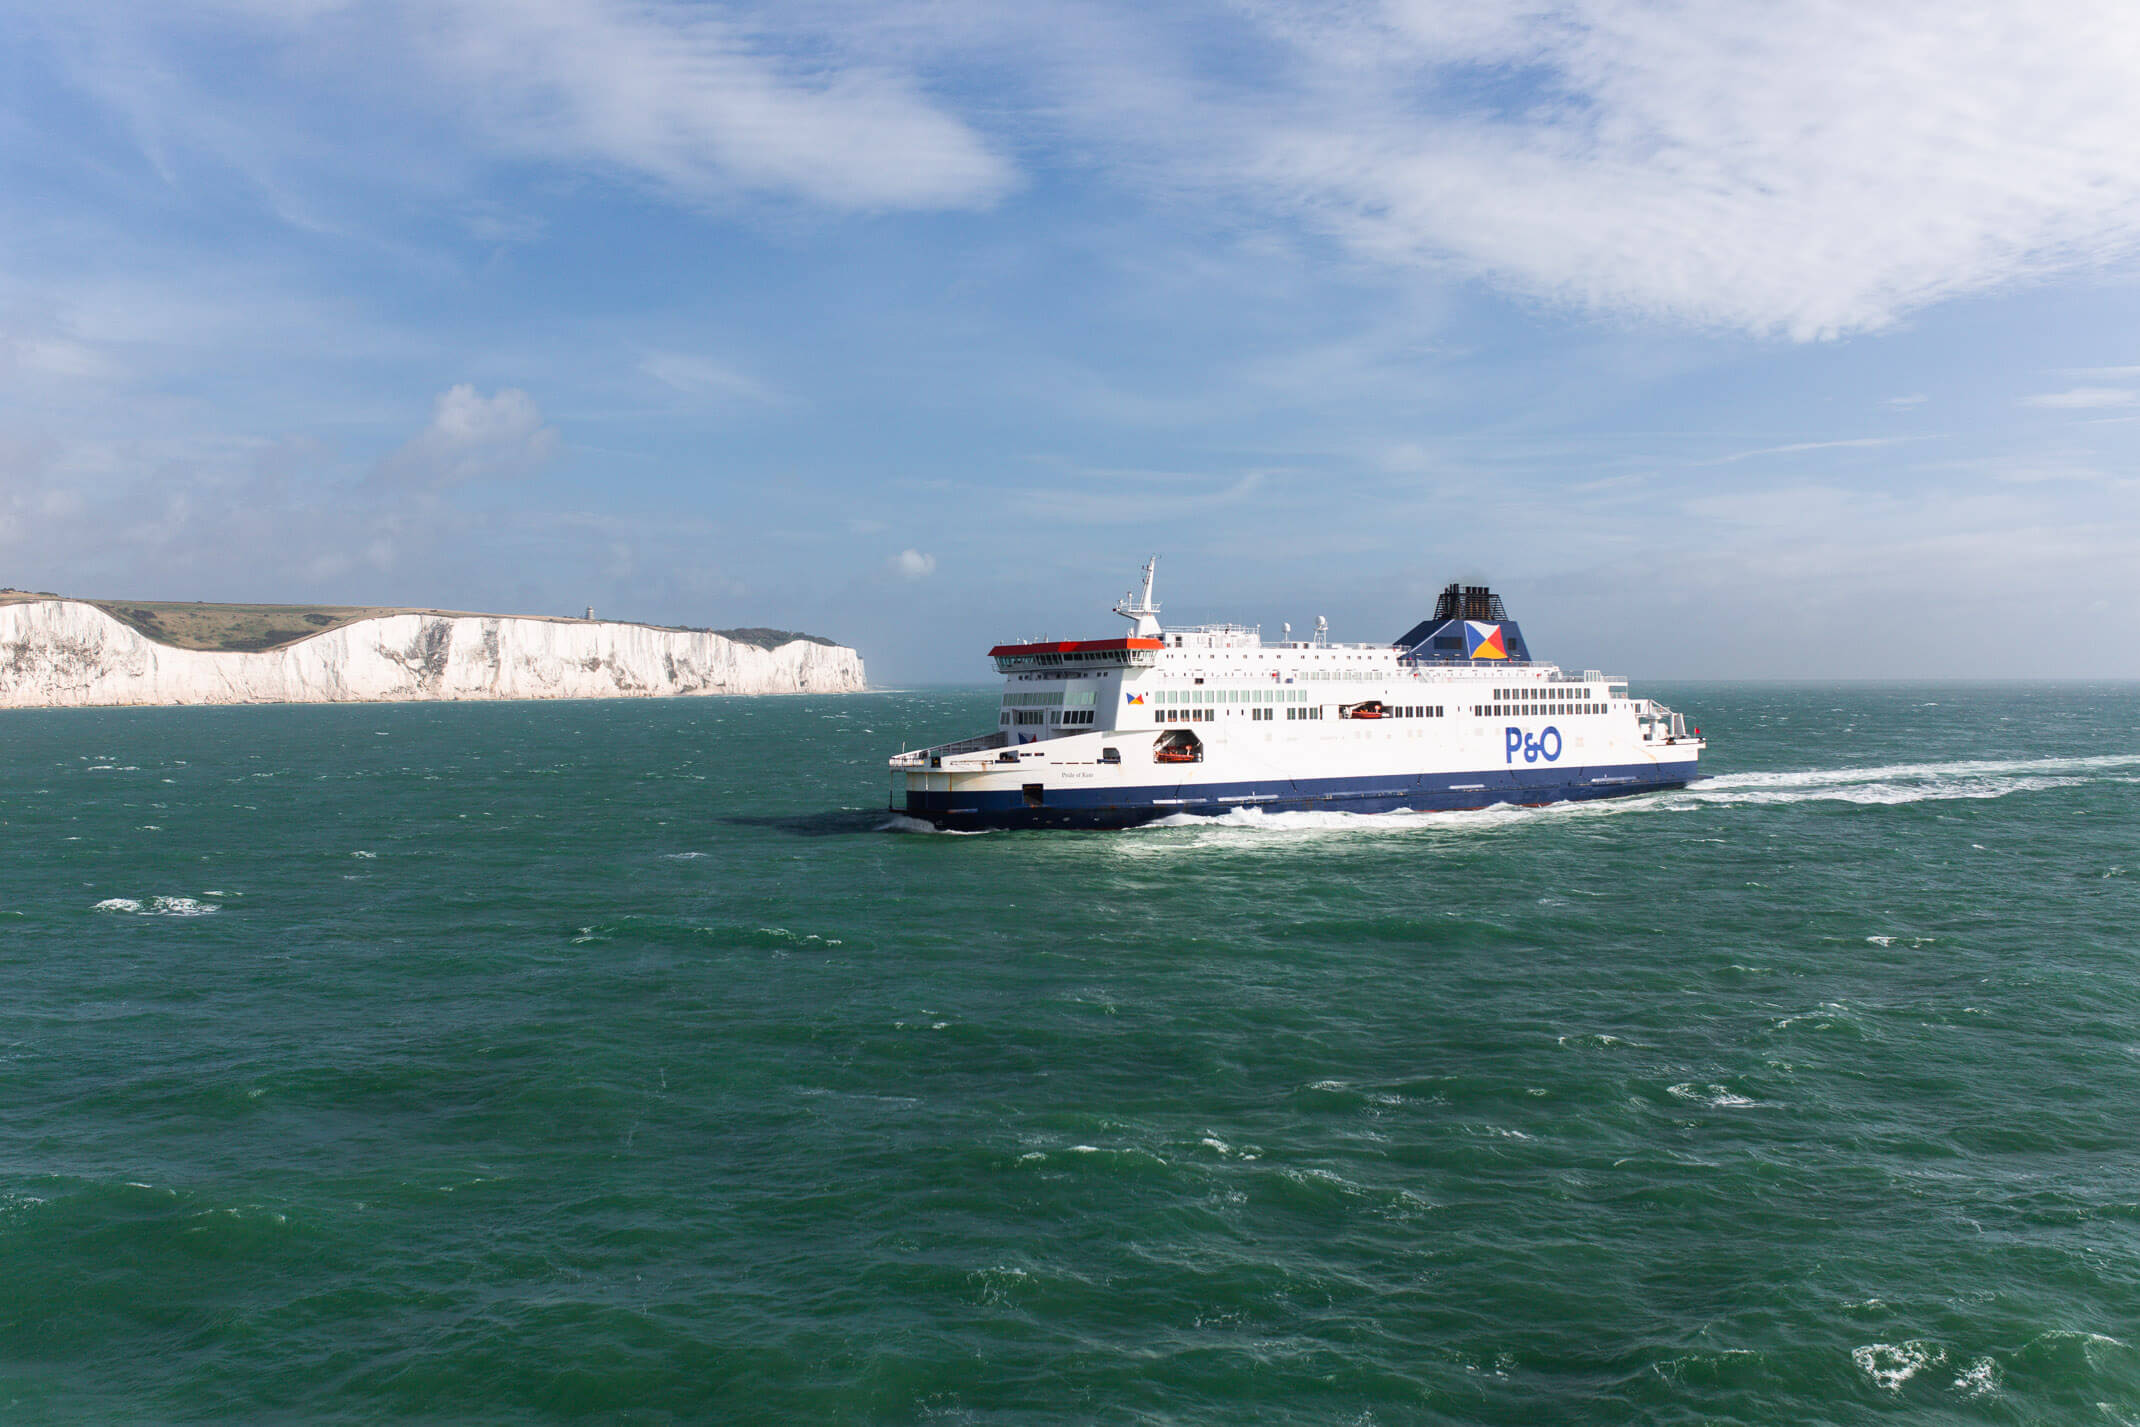 Driving from London in to France with P&O Ferries